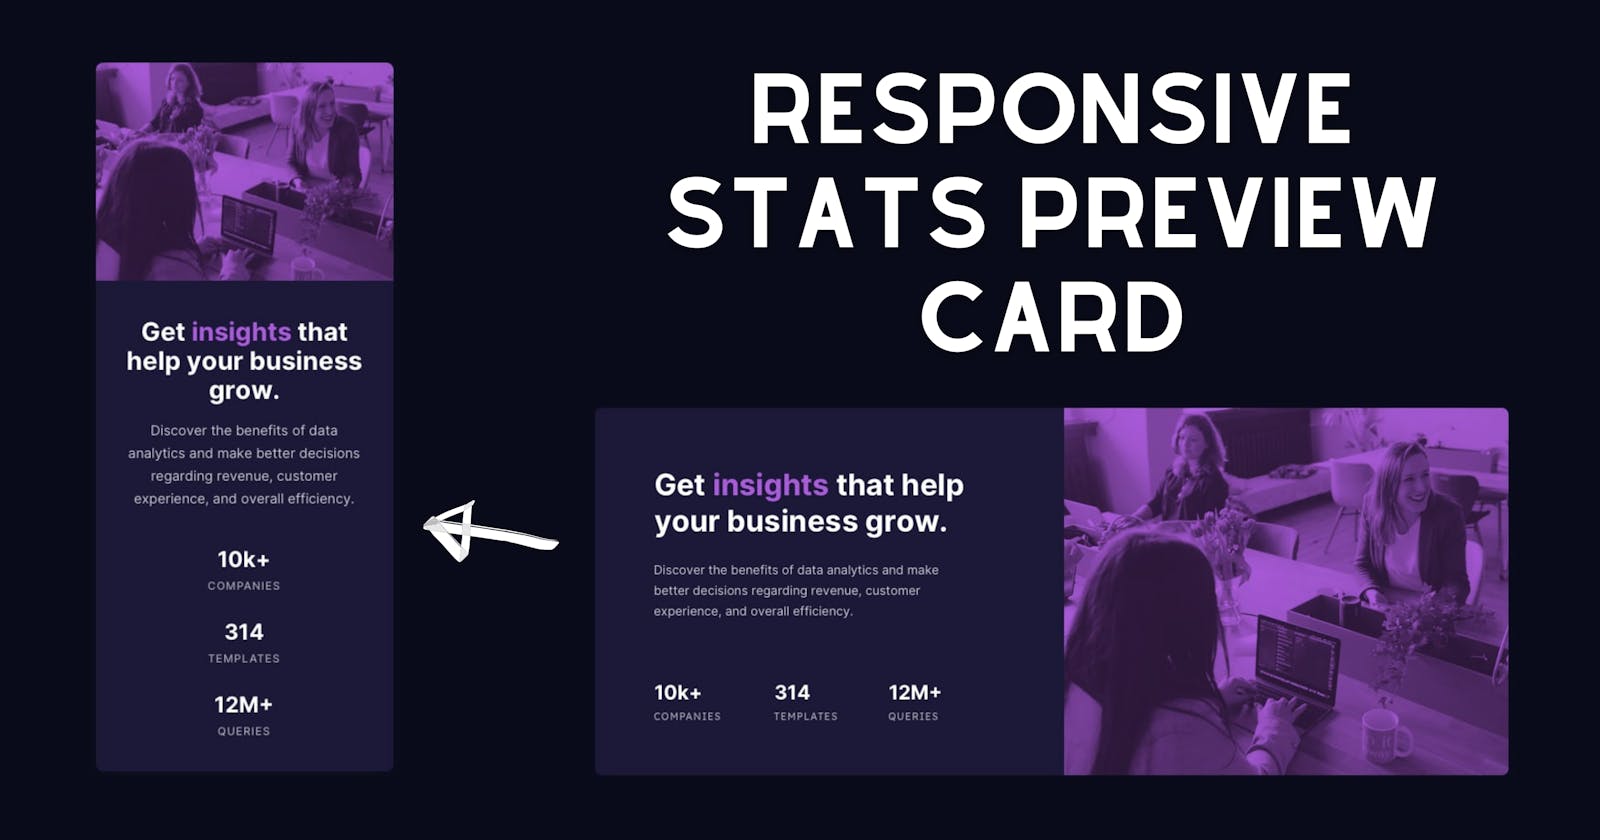 Responsive Stats Preview Card